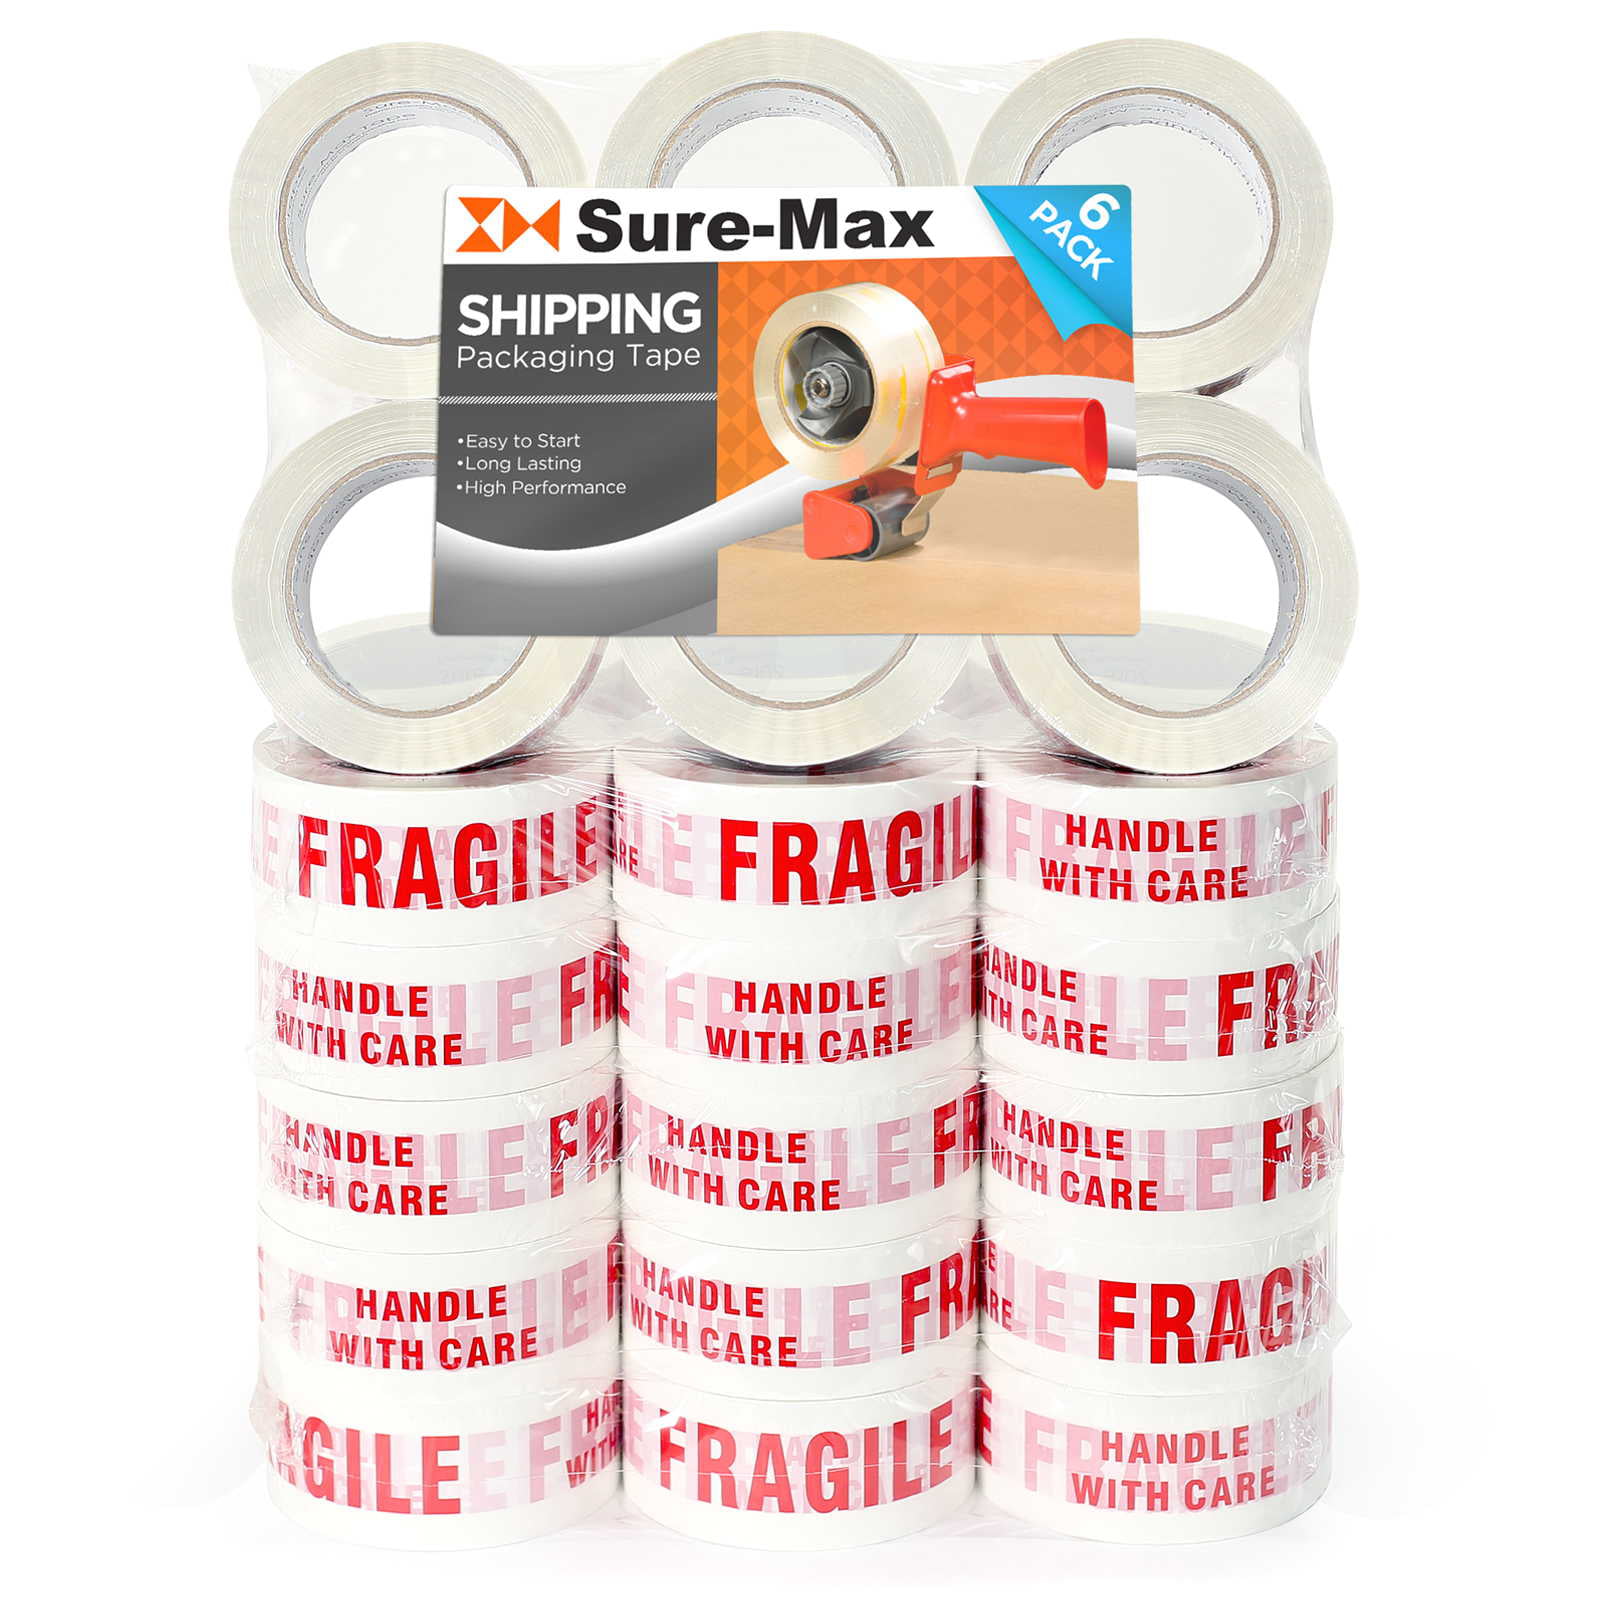 Fragile Marking Tape Handle w/ Care 5 PACK Packing-2.0 mil 330' FREE SHIPPING 